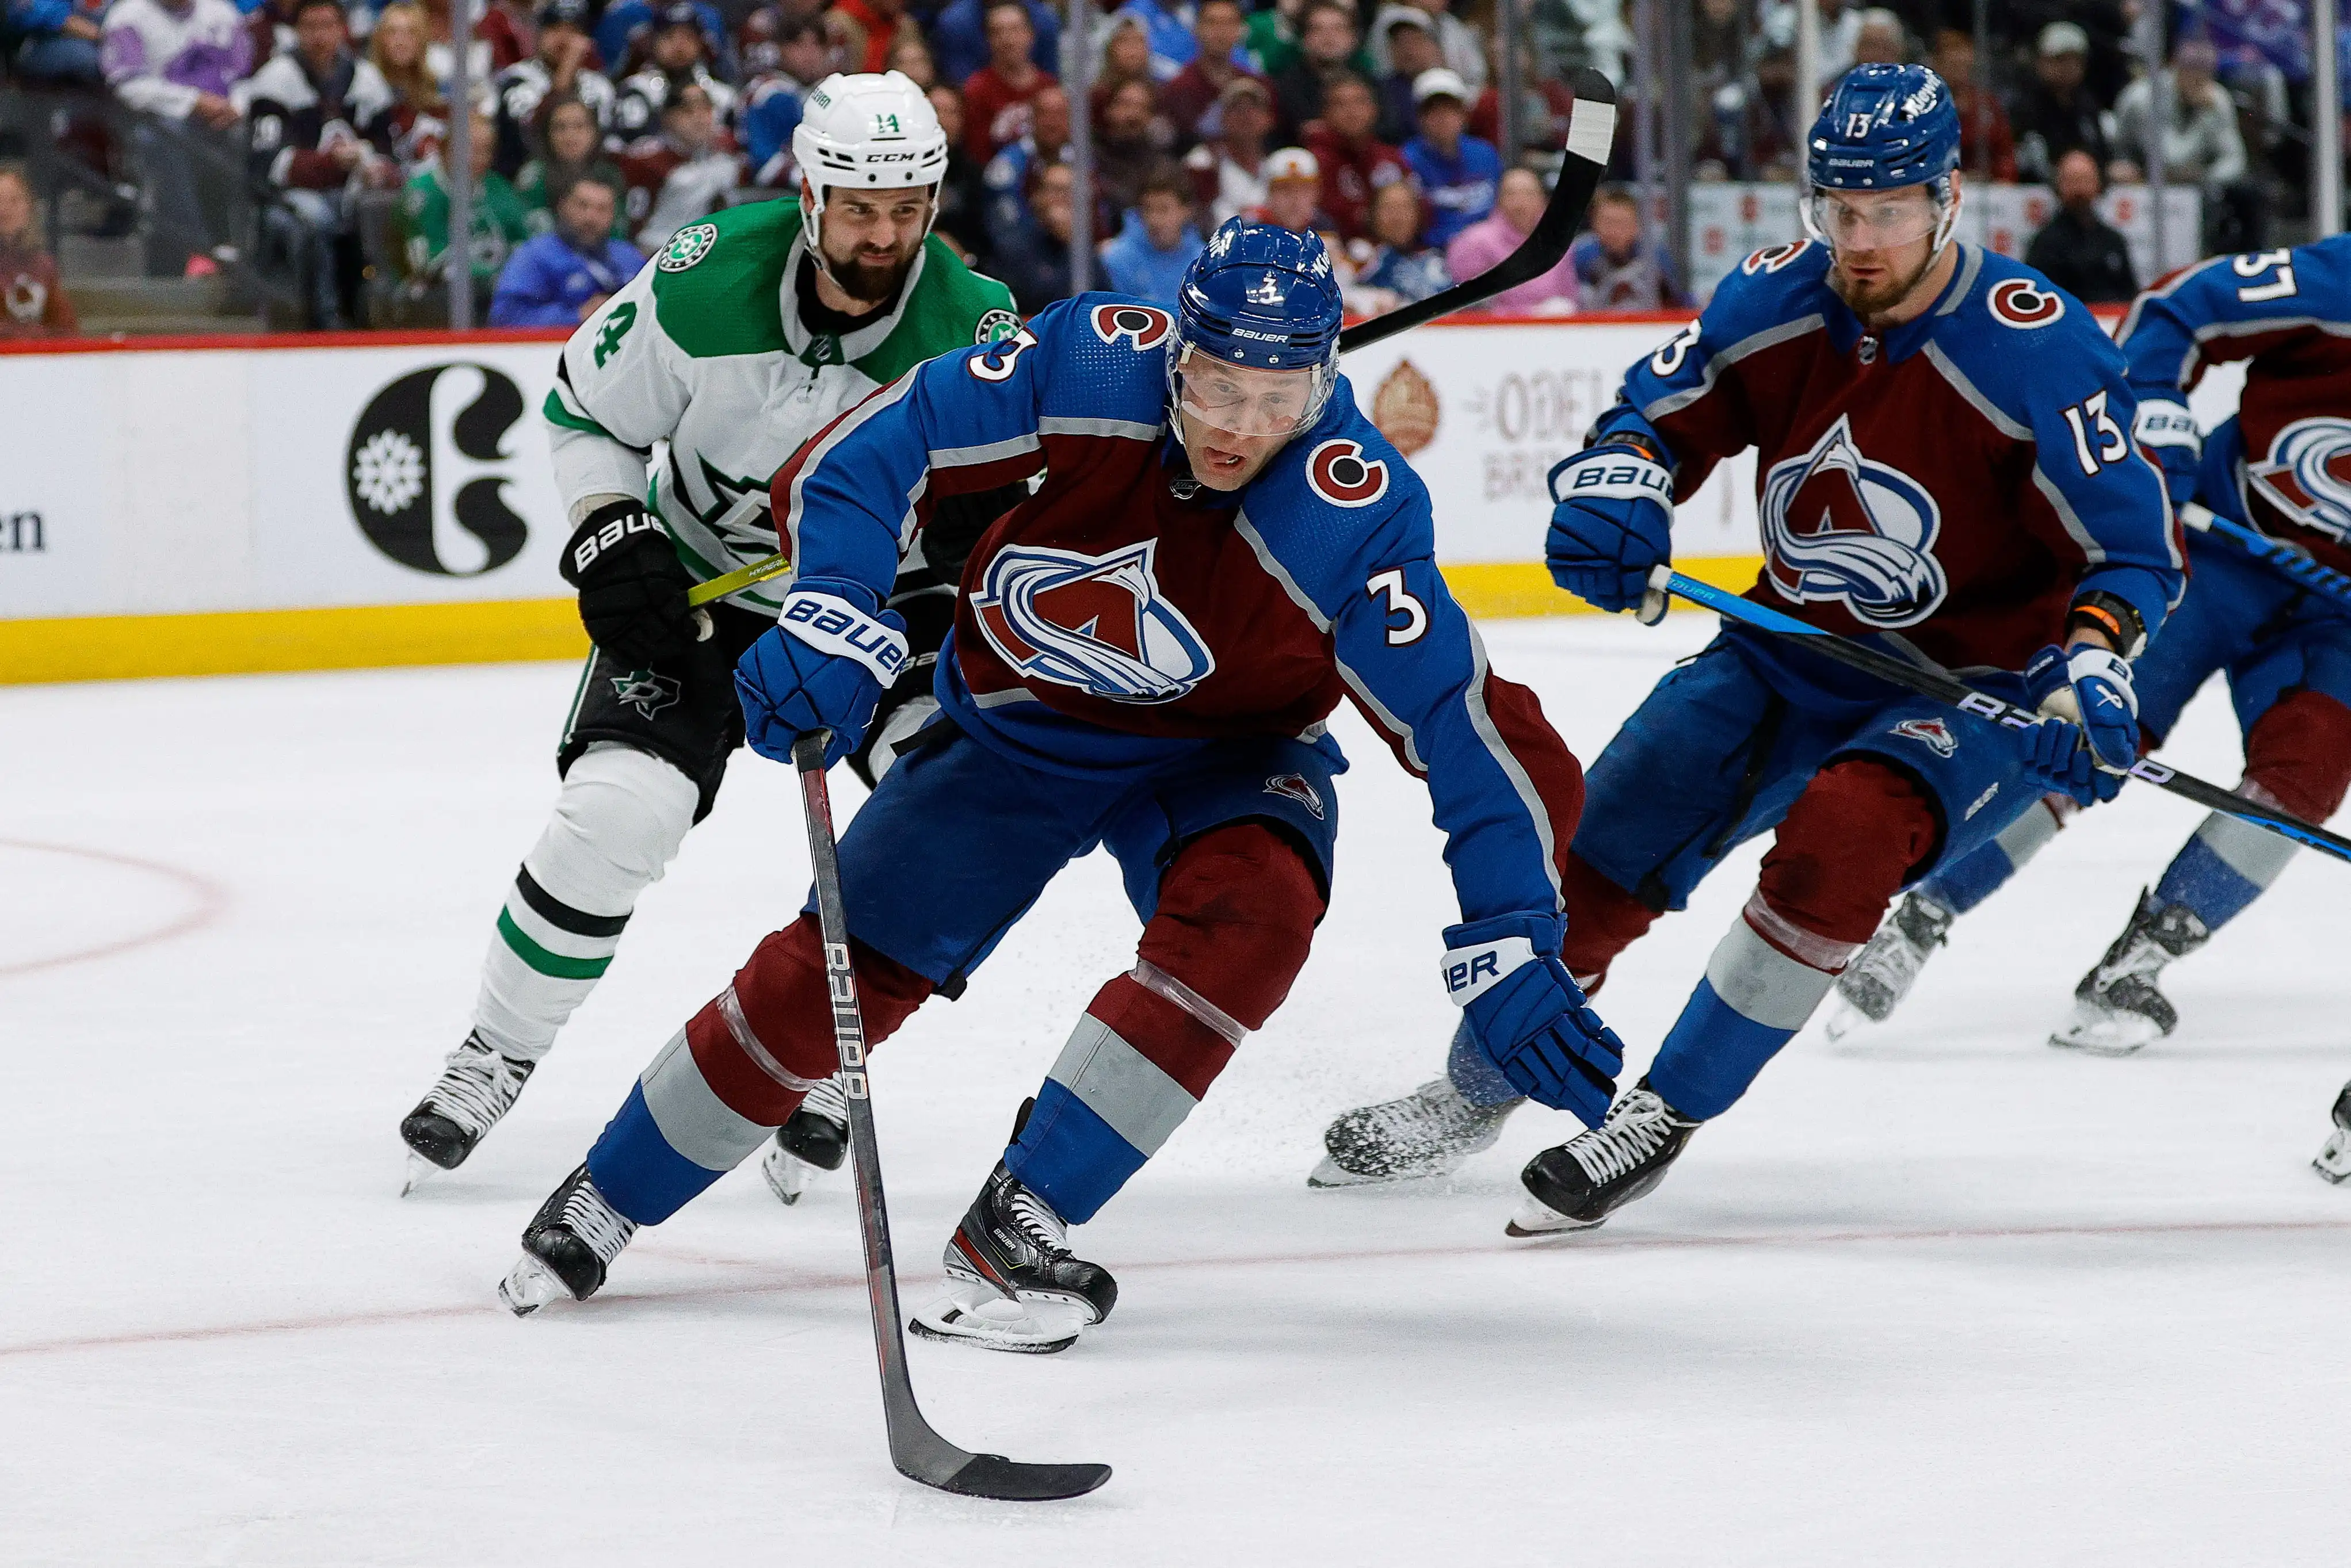 MacKinnon wya lets score next game NHL fans react to Colorado Avalanches 4-1 Game 3 loss to Dallas Stars